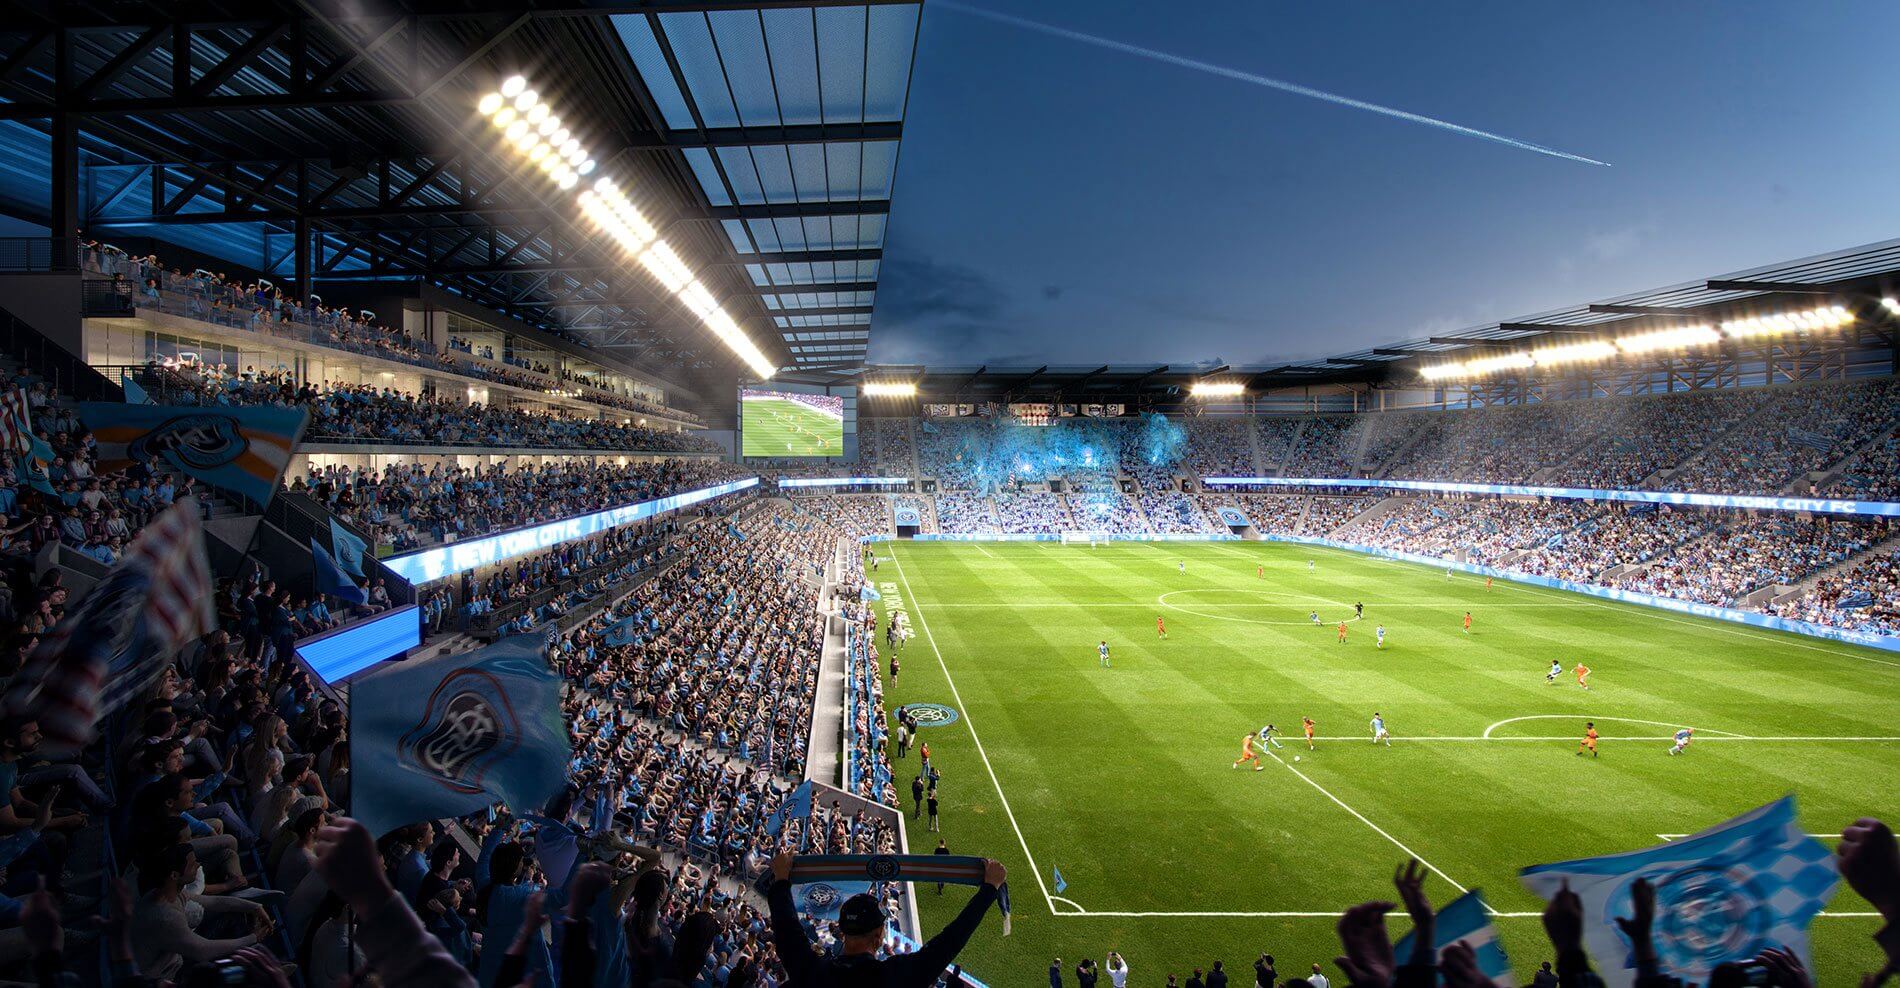 rendering of a seat-level view at a soccer stadium